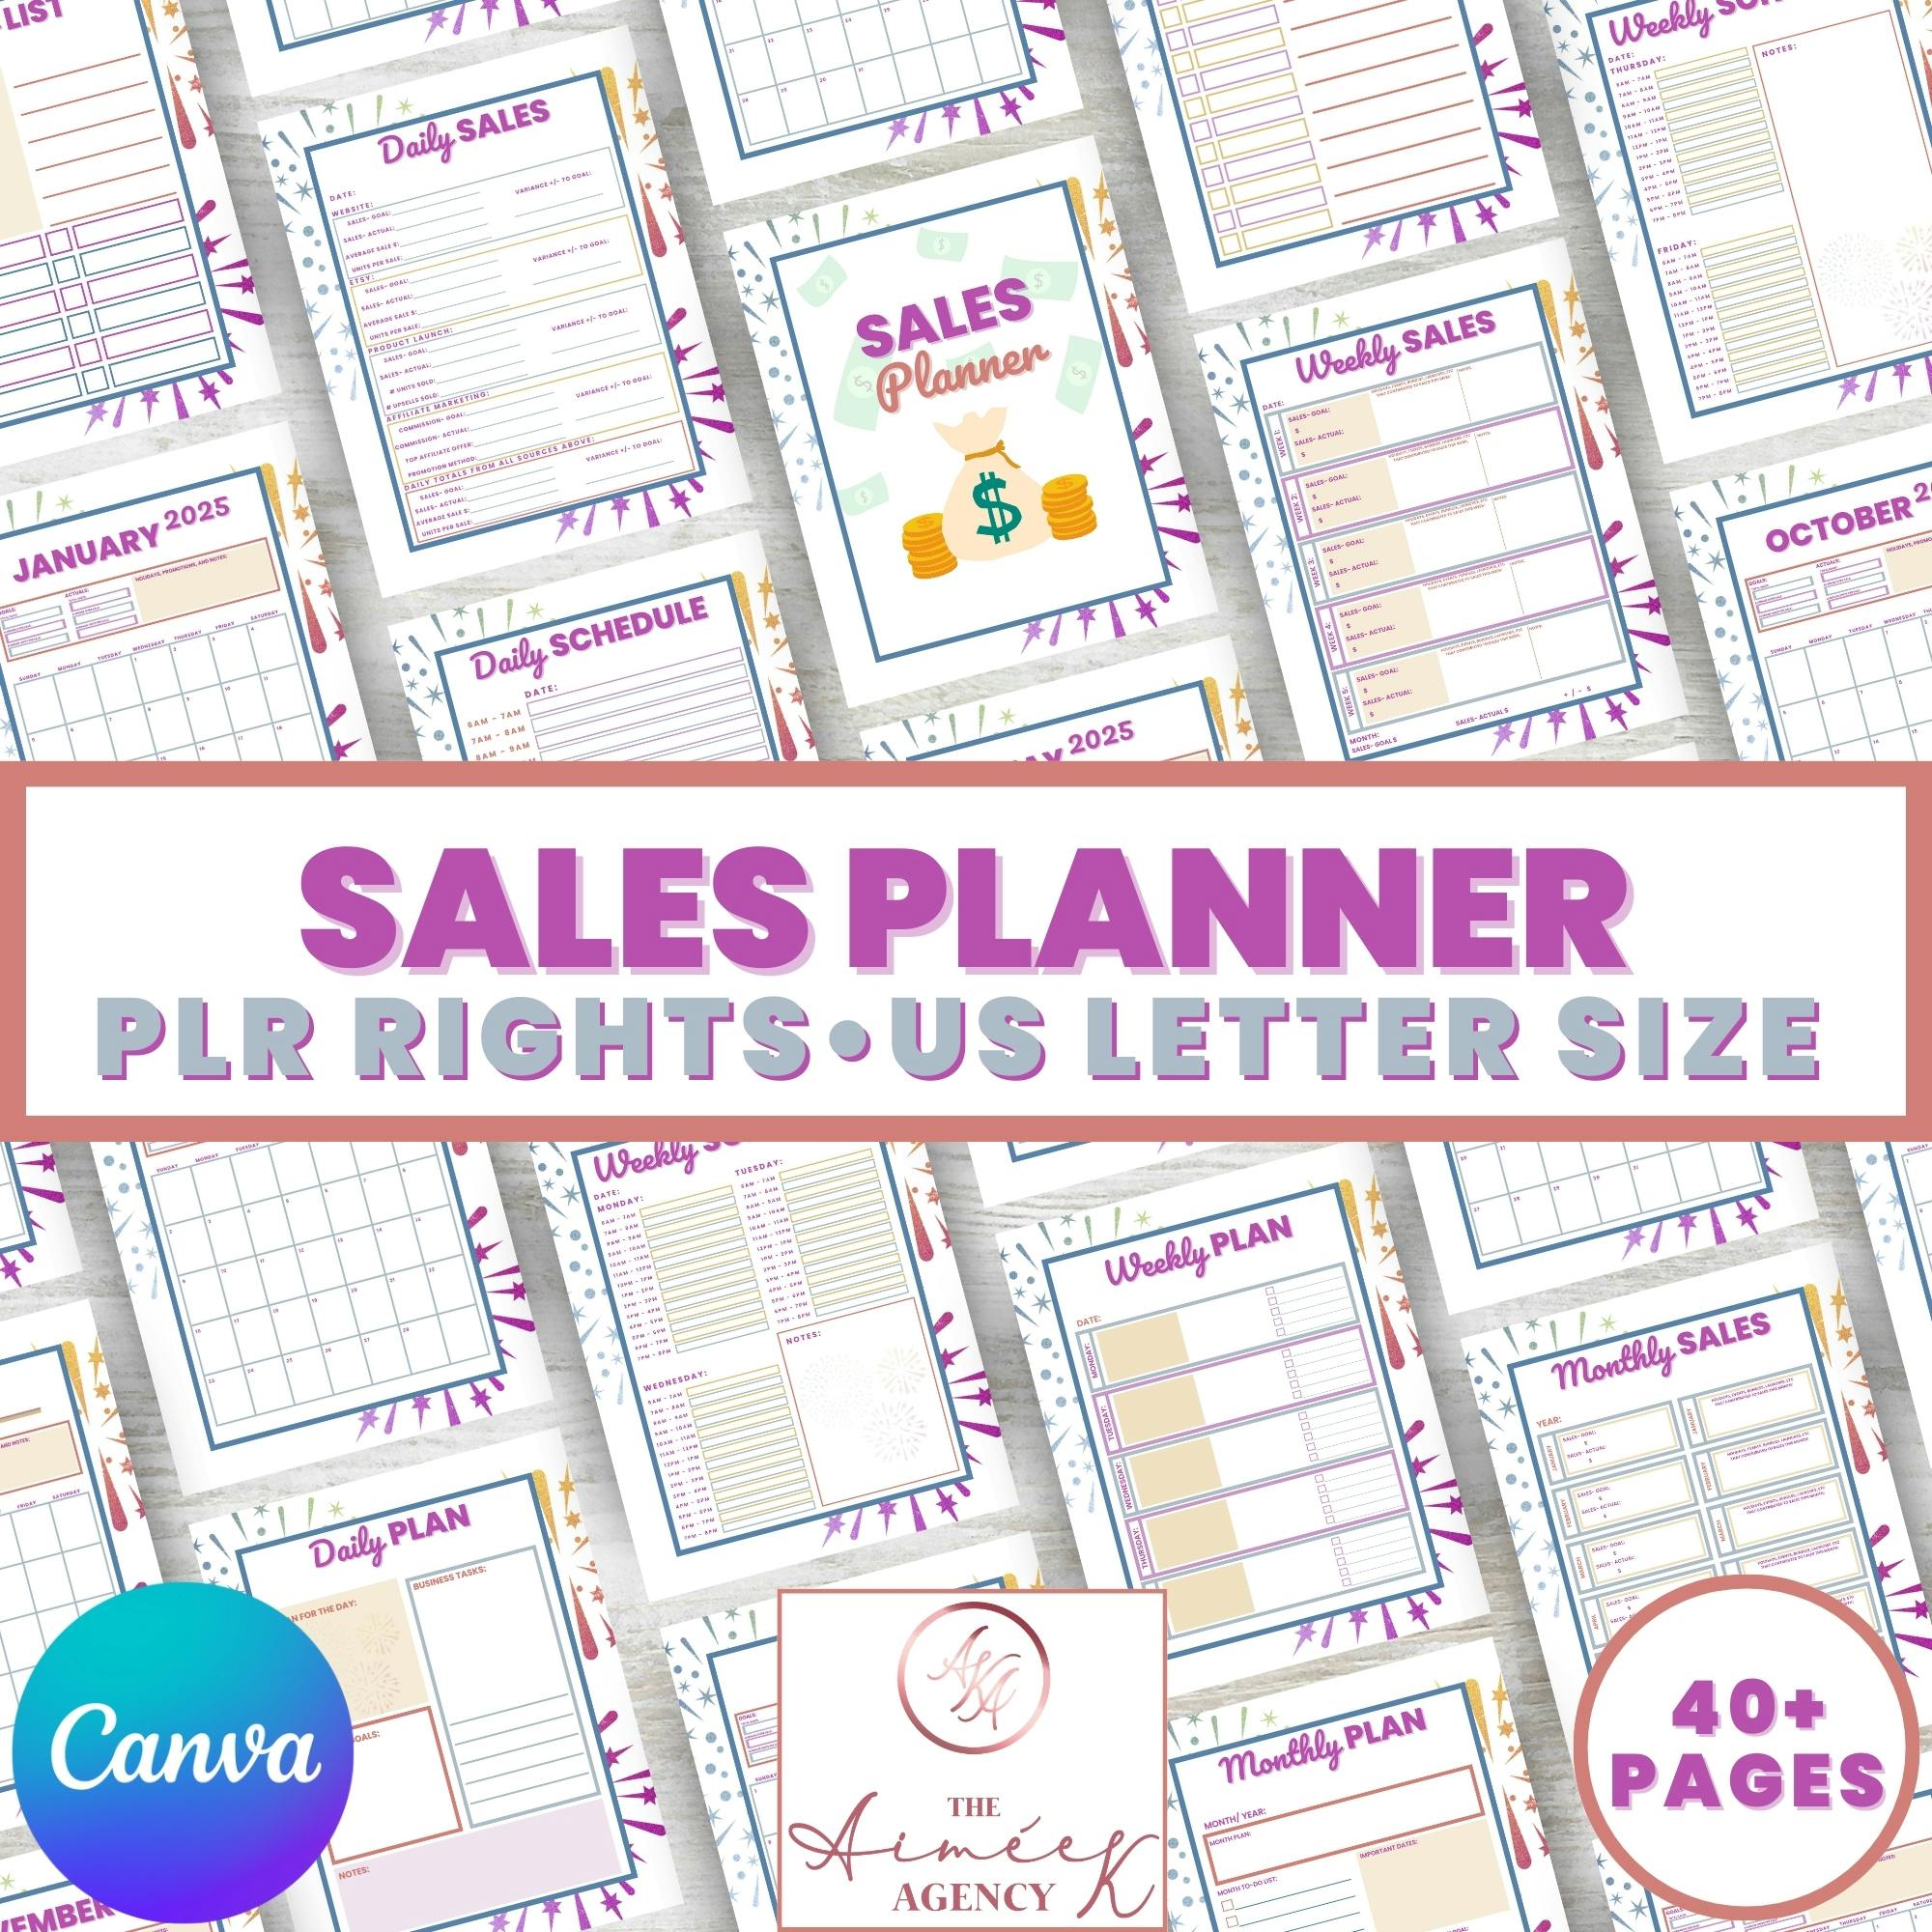 My contribution to the Let's Get digital Bundle is my Sales Planner with PLR Rights